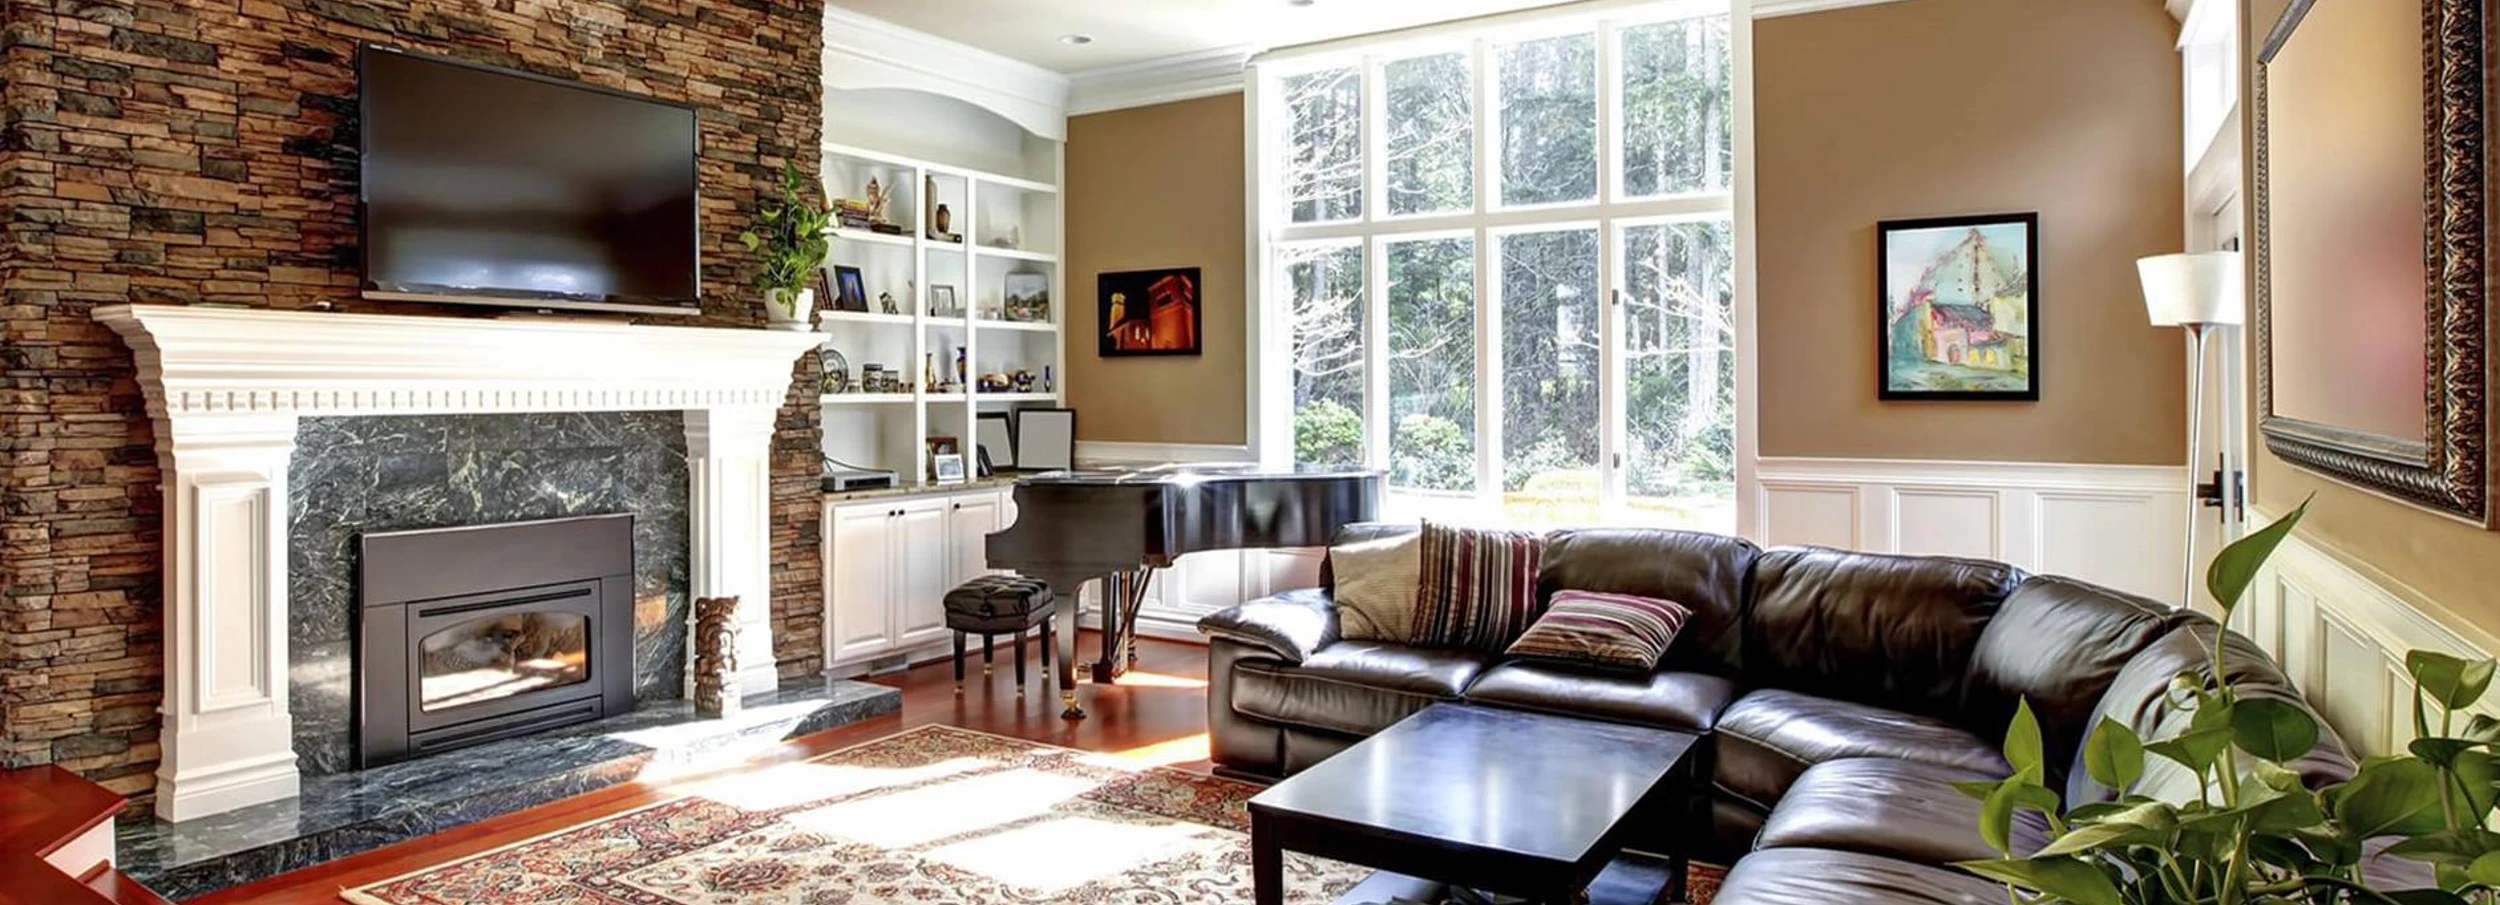 Brown themed living room with a leather couch and brick fireplace with white mantel.